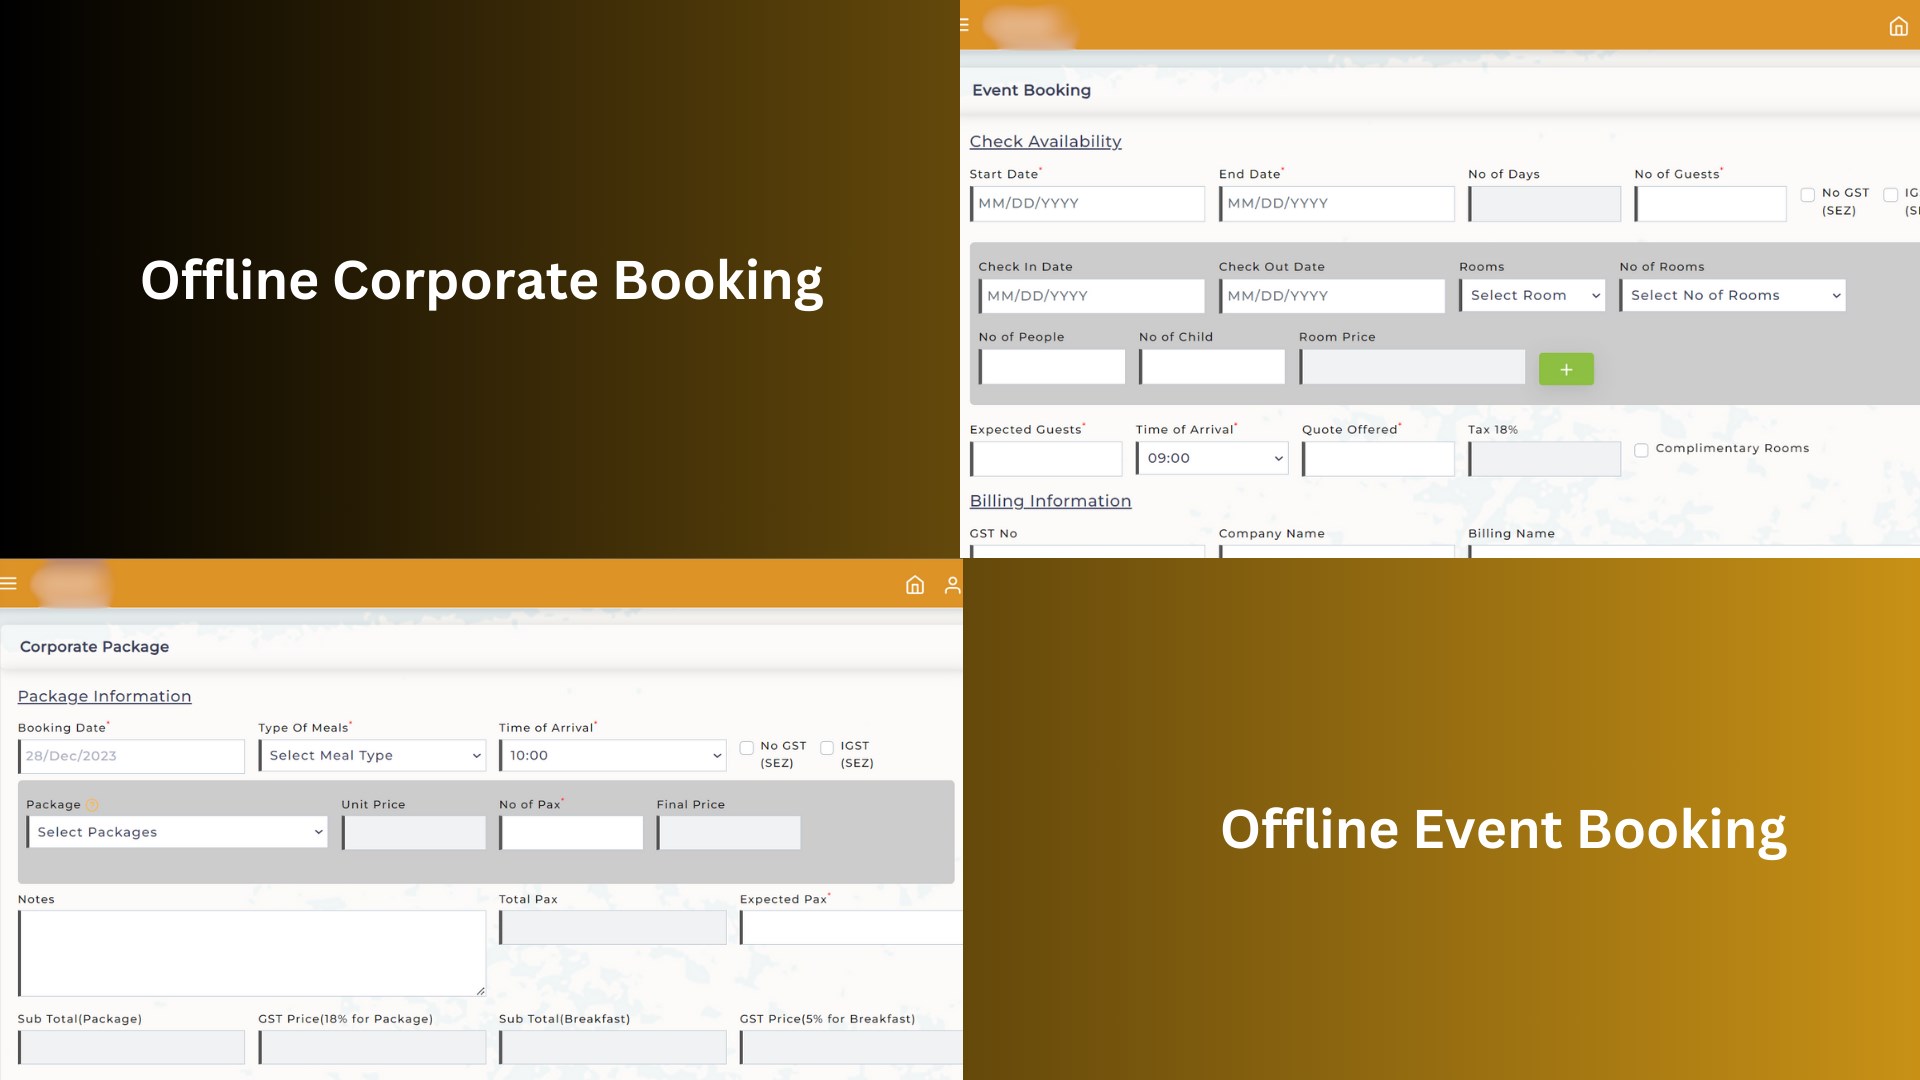 Offline Package and Events Booking Feature